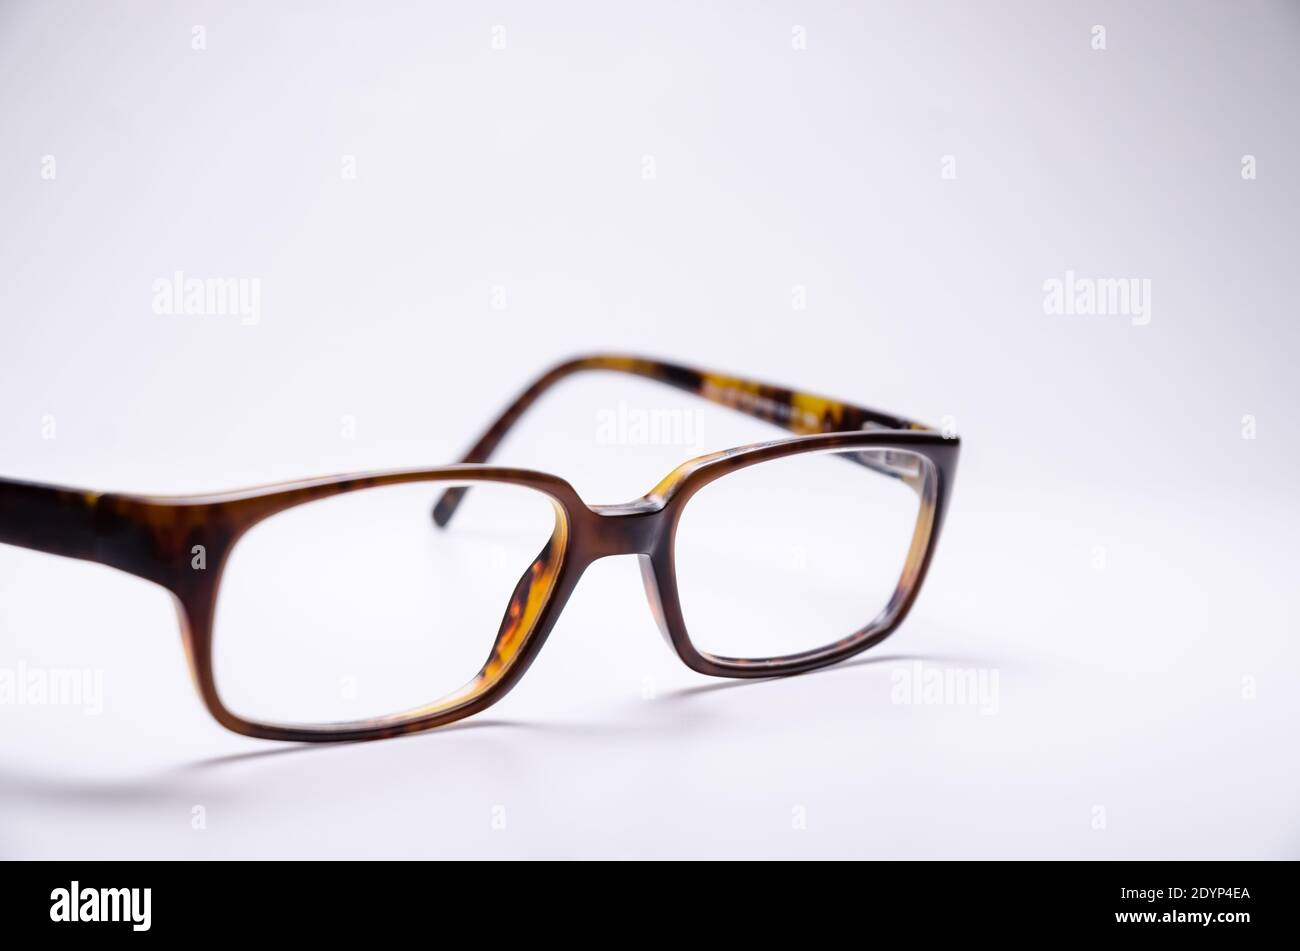 Reading glasses or spectacles on white background, isolated, cut out ...